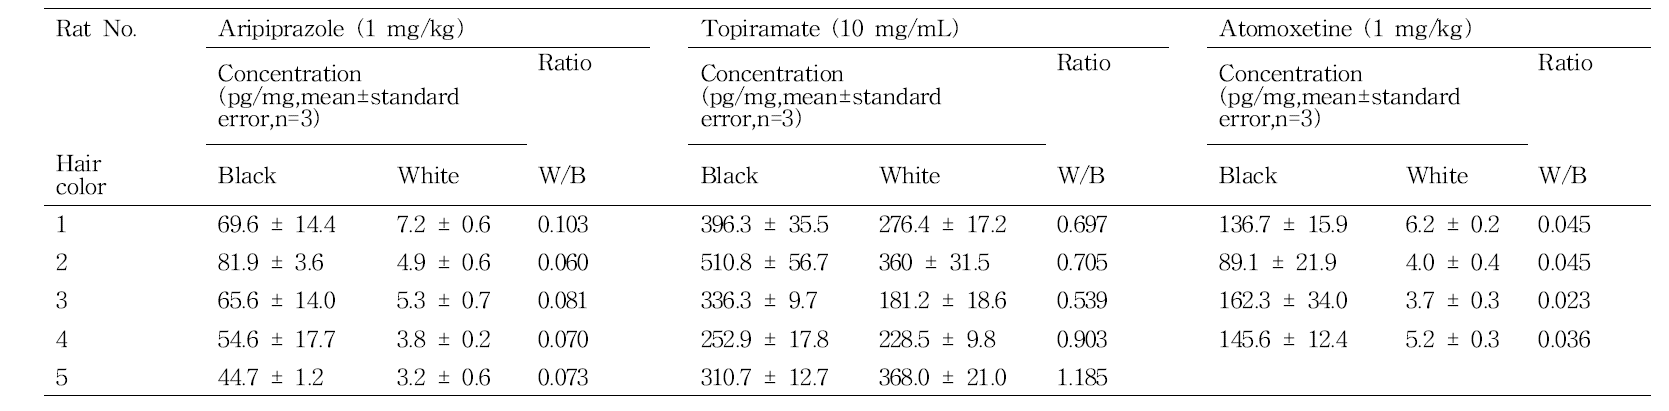 The deposition of aripiprazole, topiramate and atomoxetine in dark grey and white hair from the multiple-dose administration to Long-Evans rats